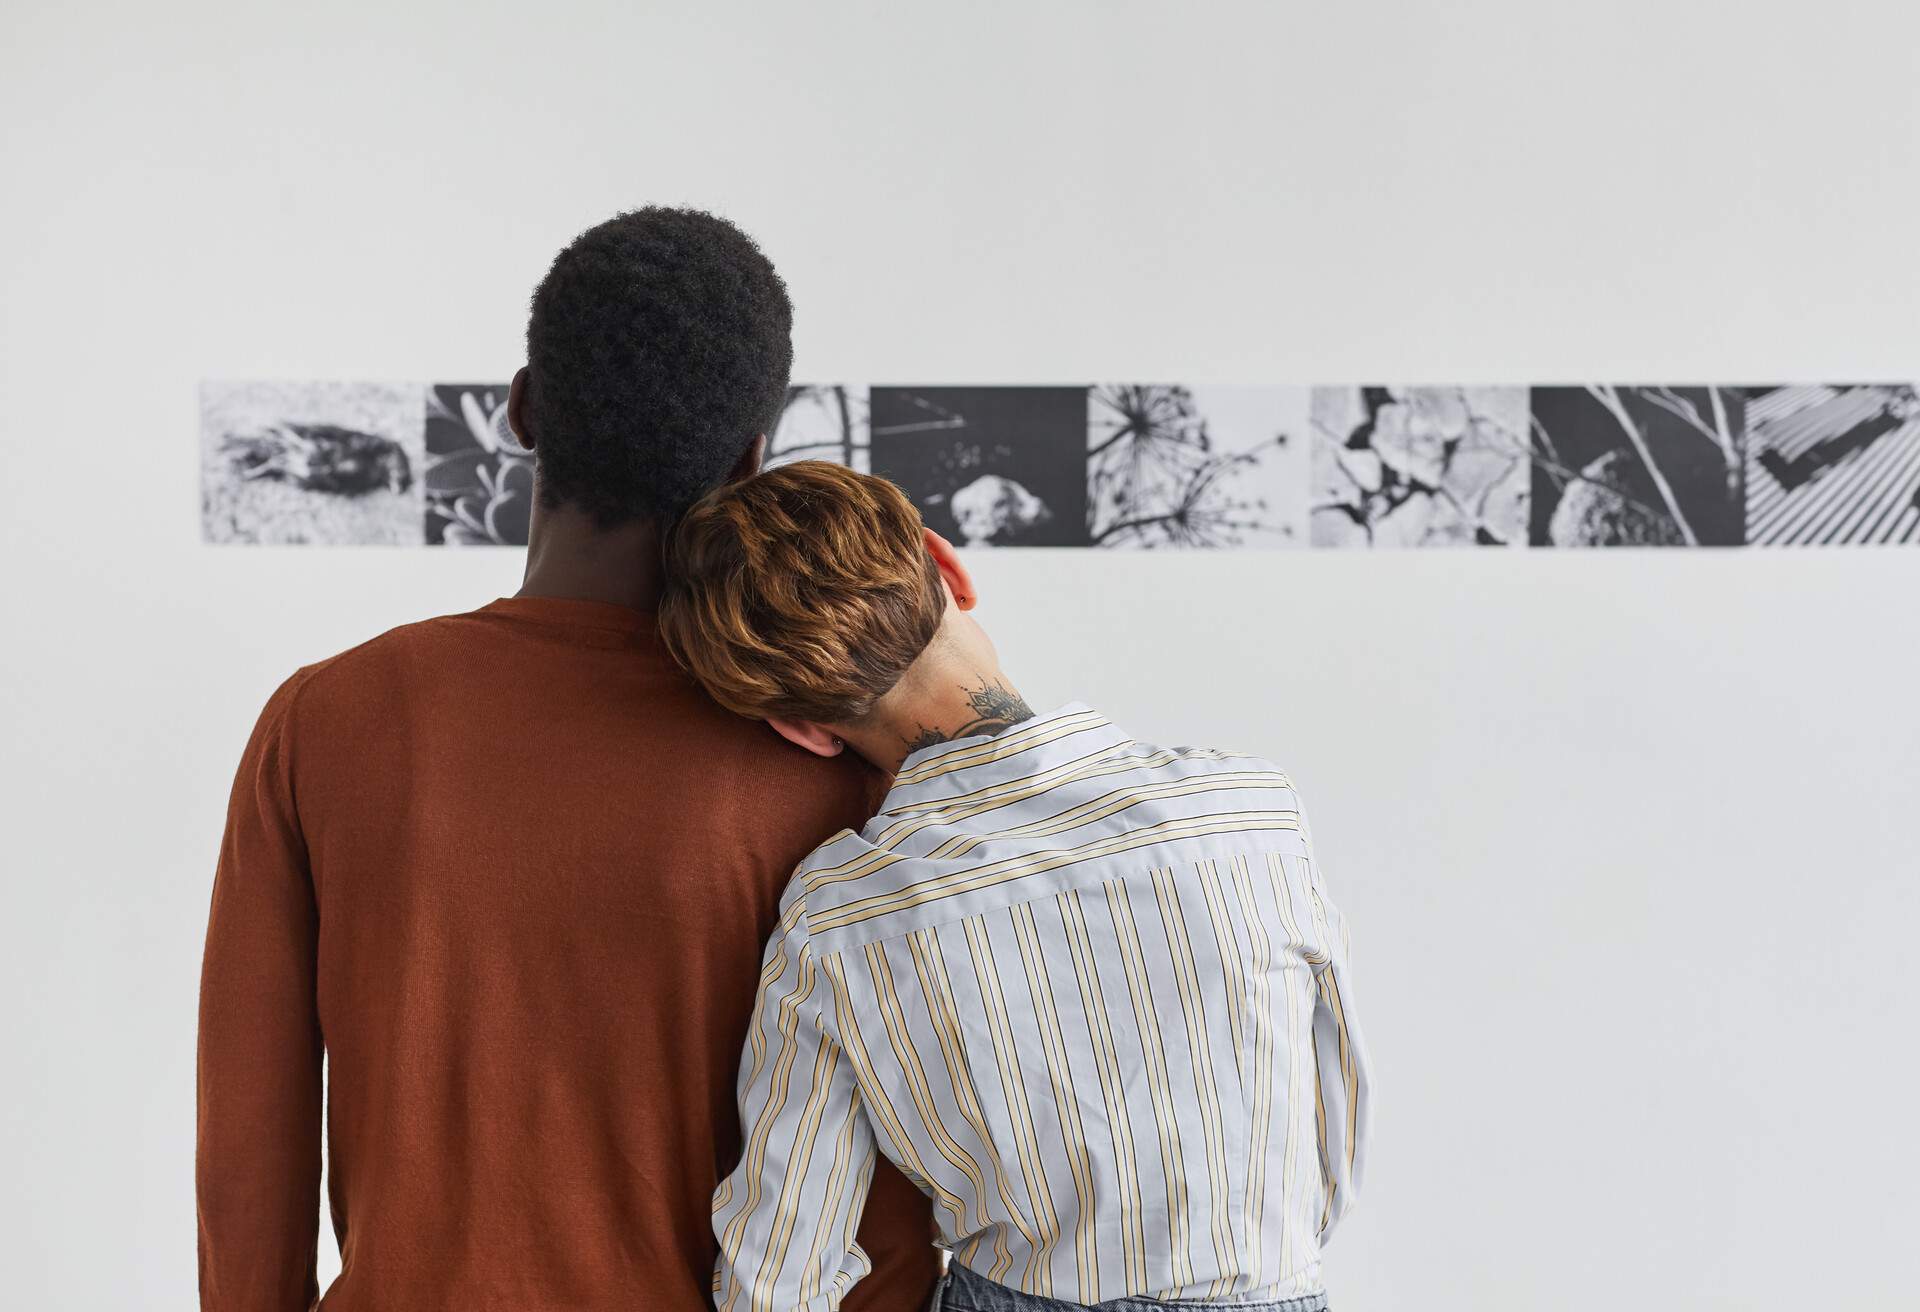 THEME_MUSEUM_ART_GALLERY_PEOPLE_COUPLE_GettyImages-1280209510